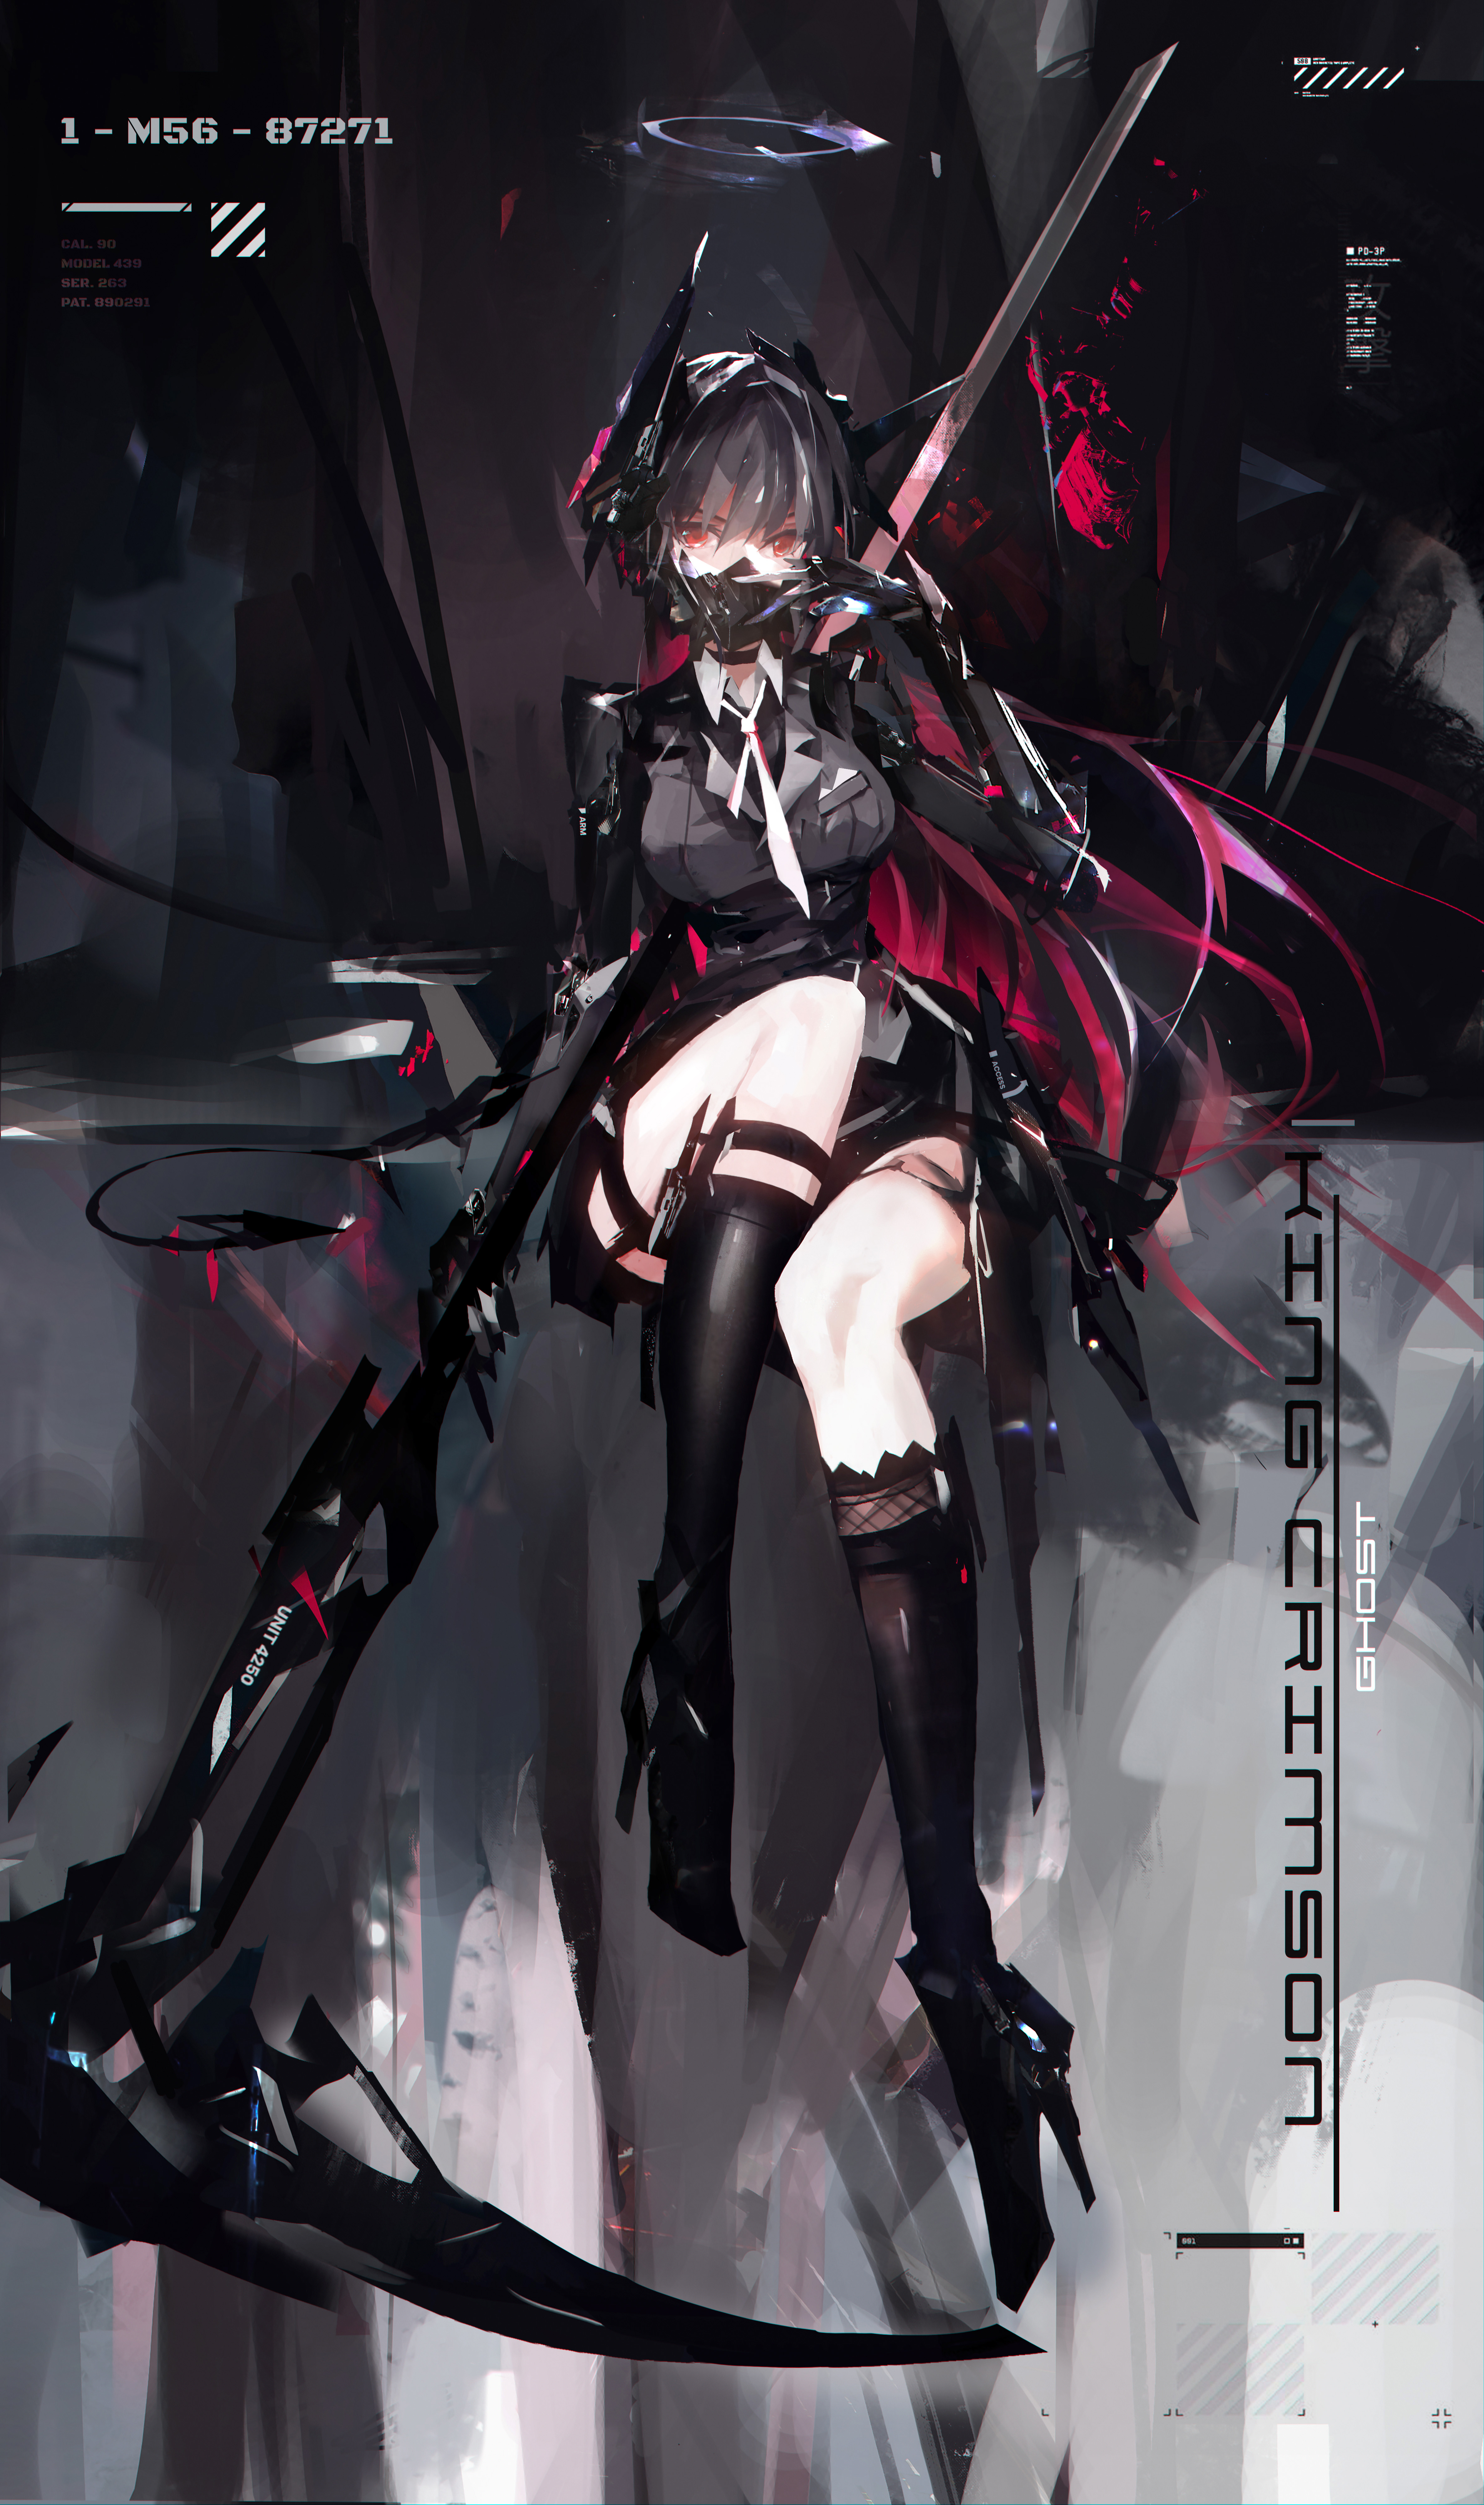 Anime 4740x8000 cell (artist) anime girls girls with guns science fiction